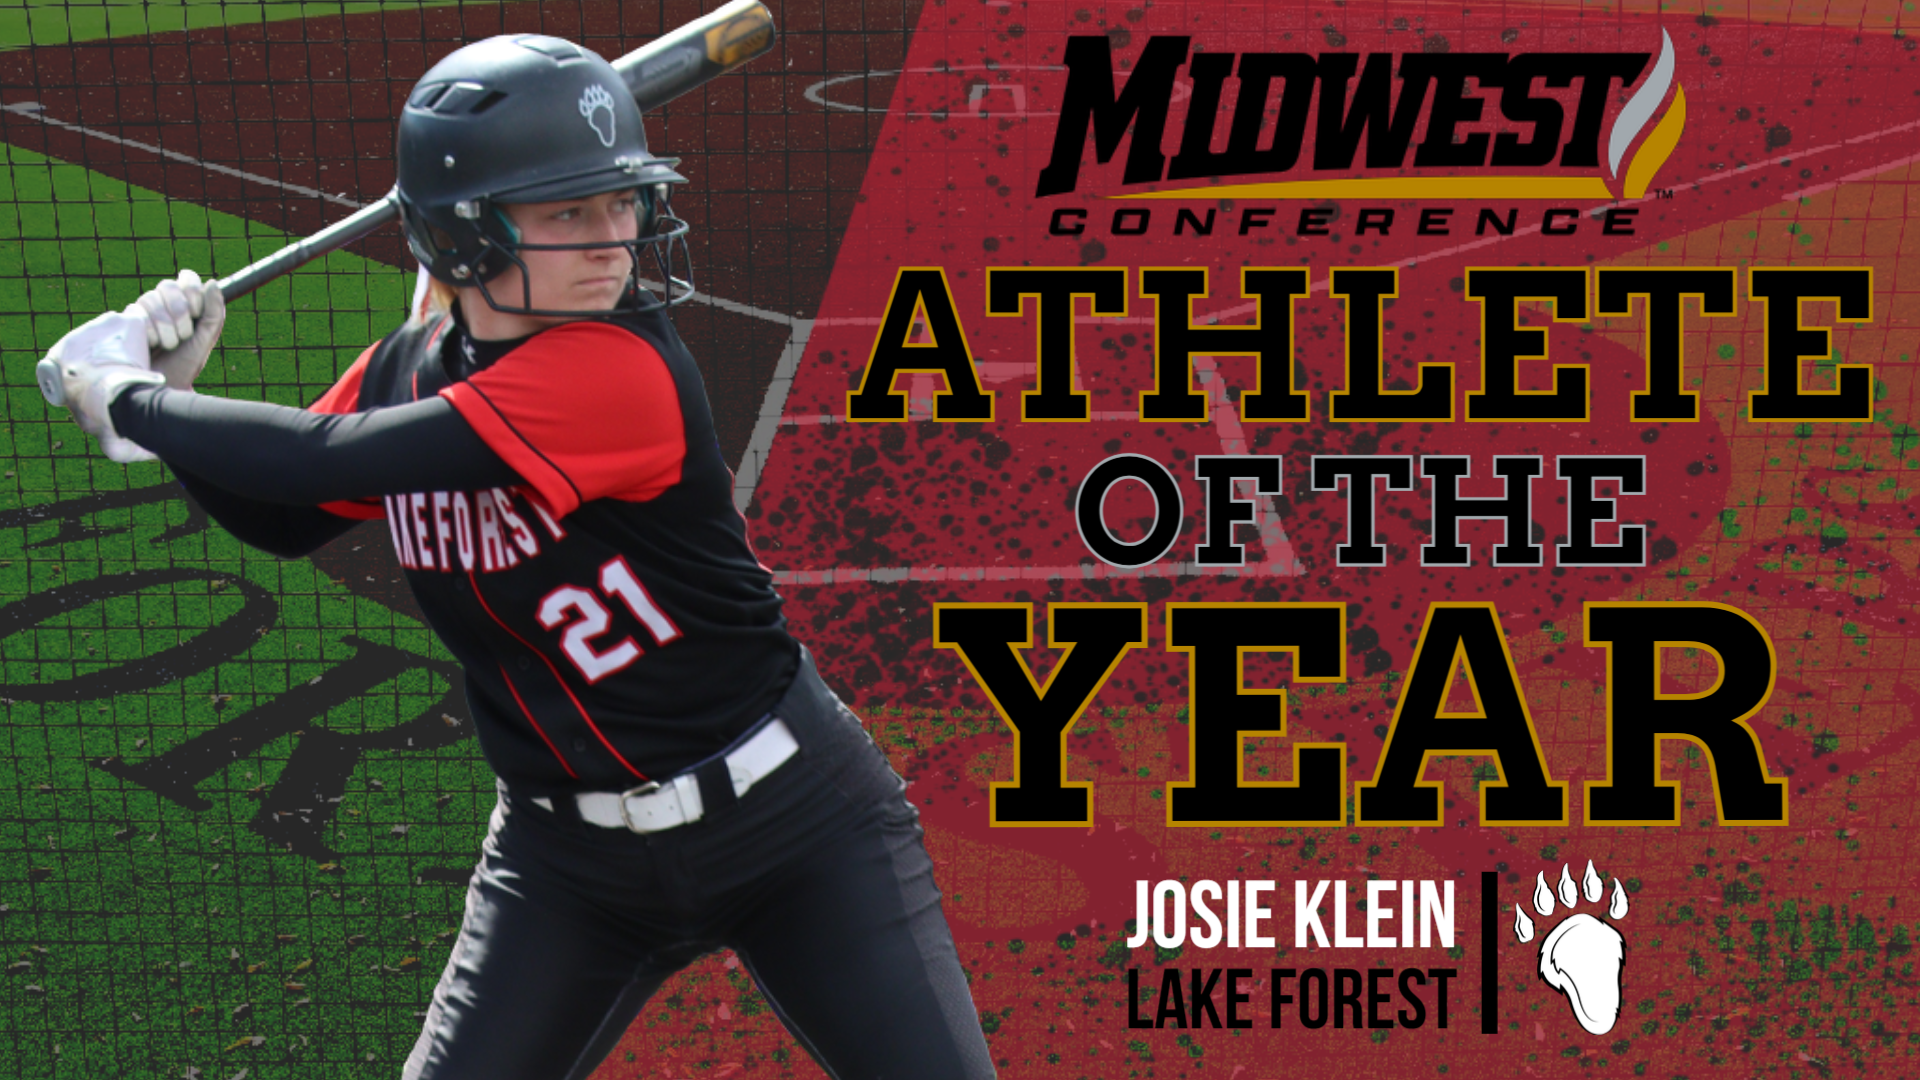 Josie Klein Named MWC Athlete of the Year for Women's Sports